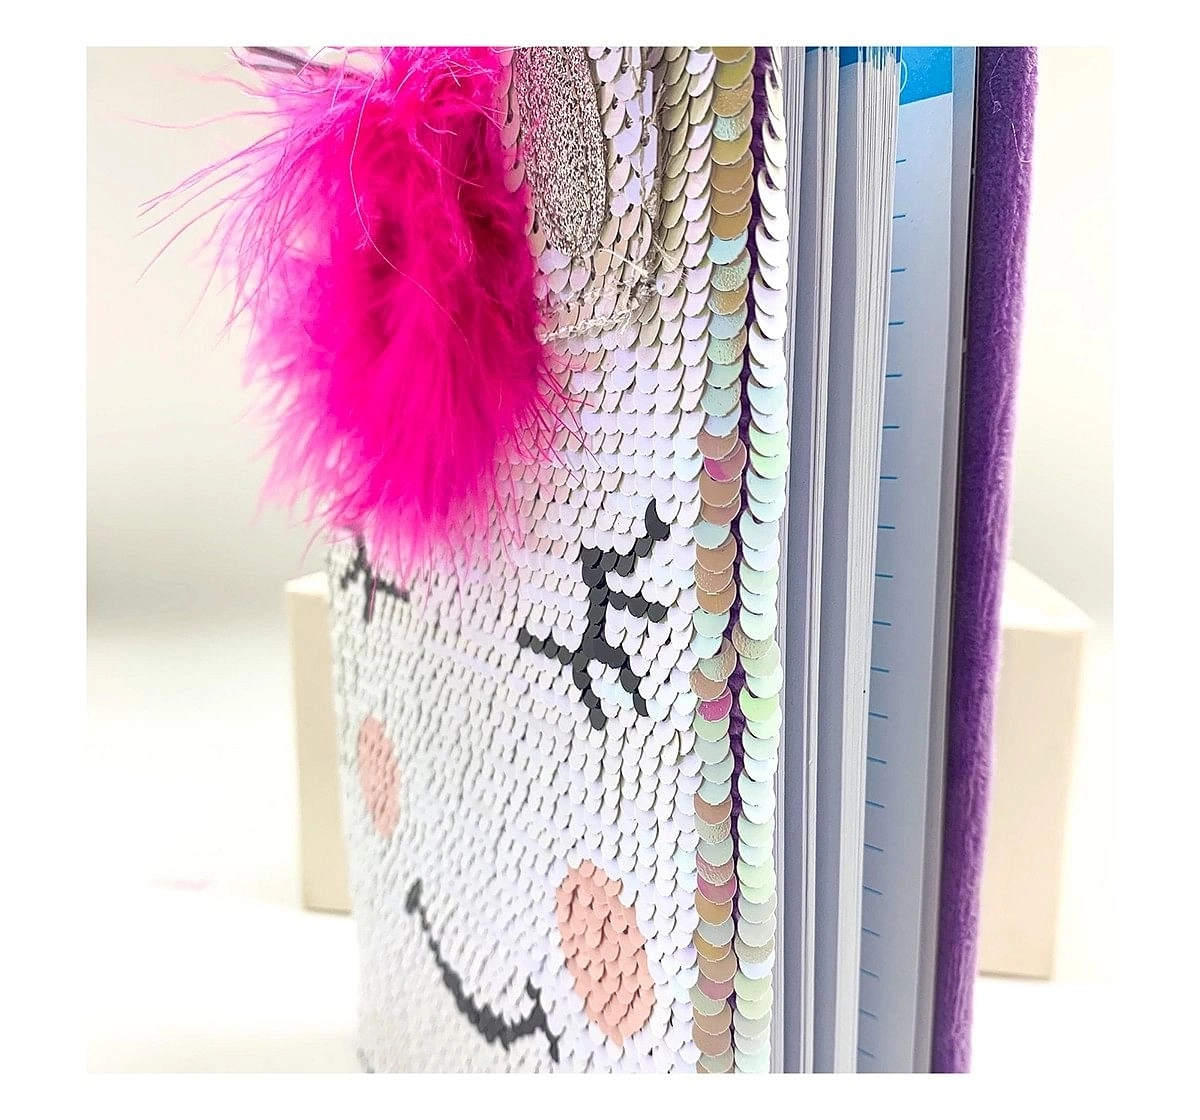 Hamster London Sequin Unicorn Diary for Kids age 3Y+ (Pink)